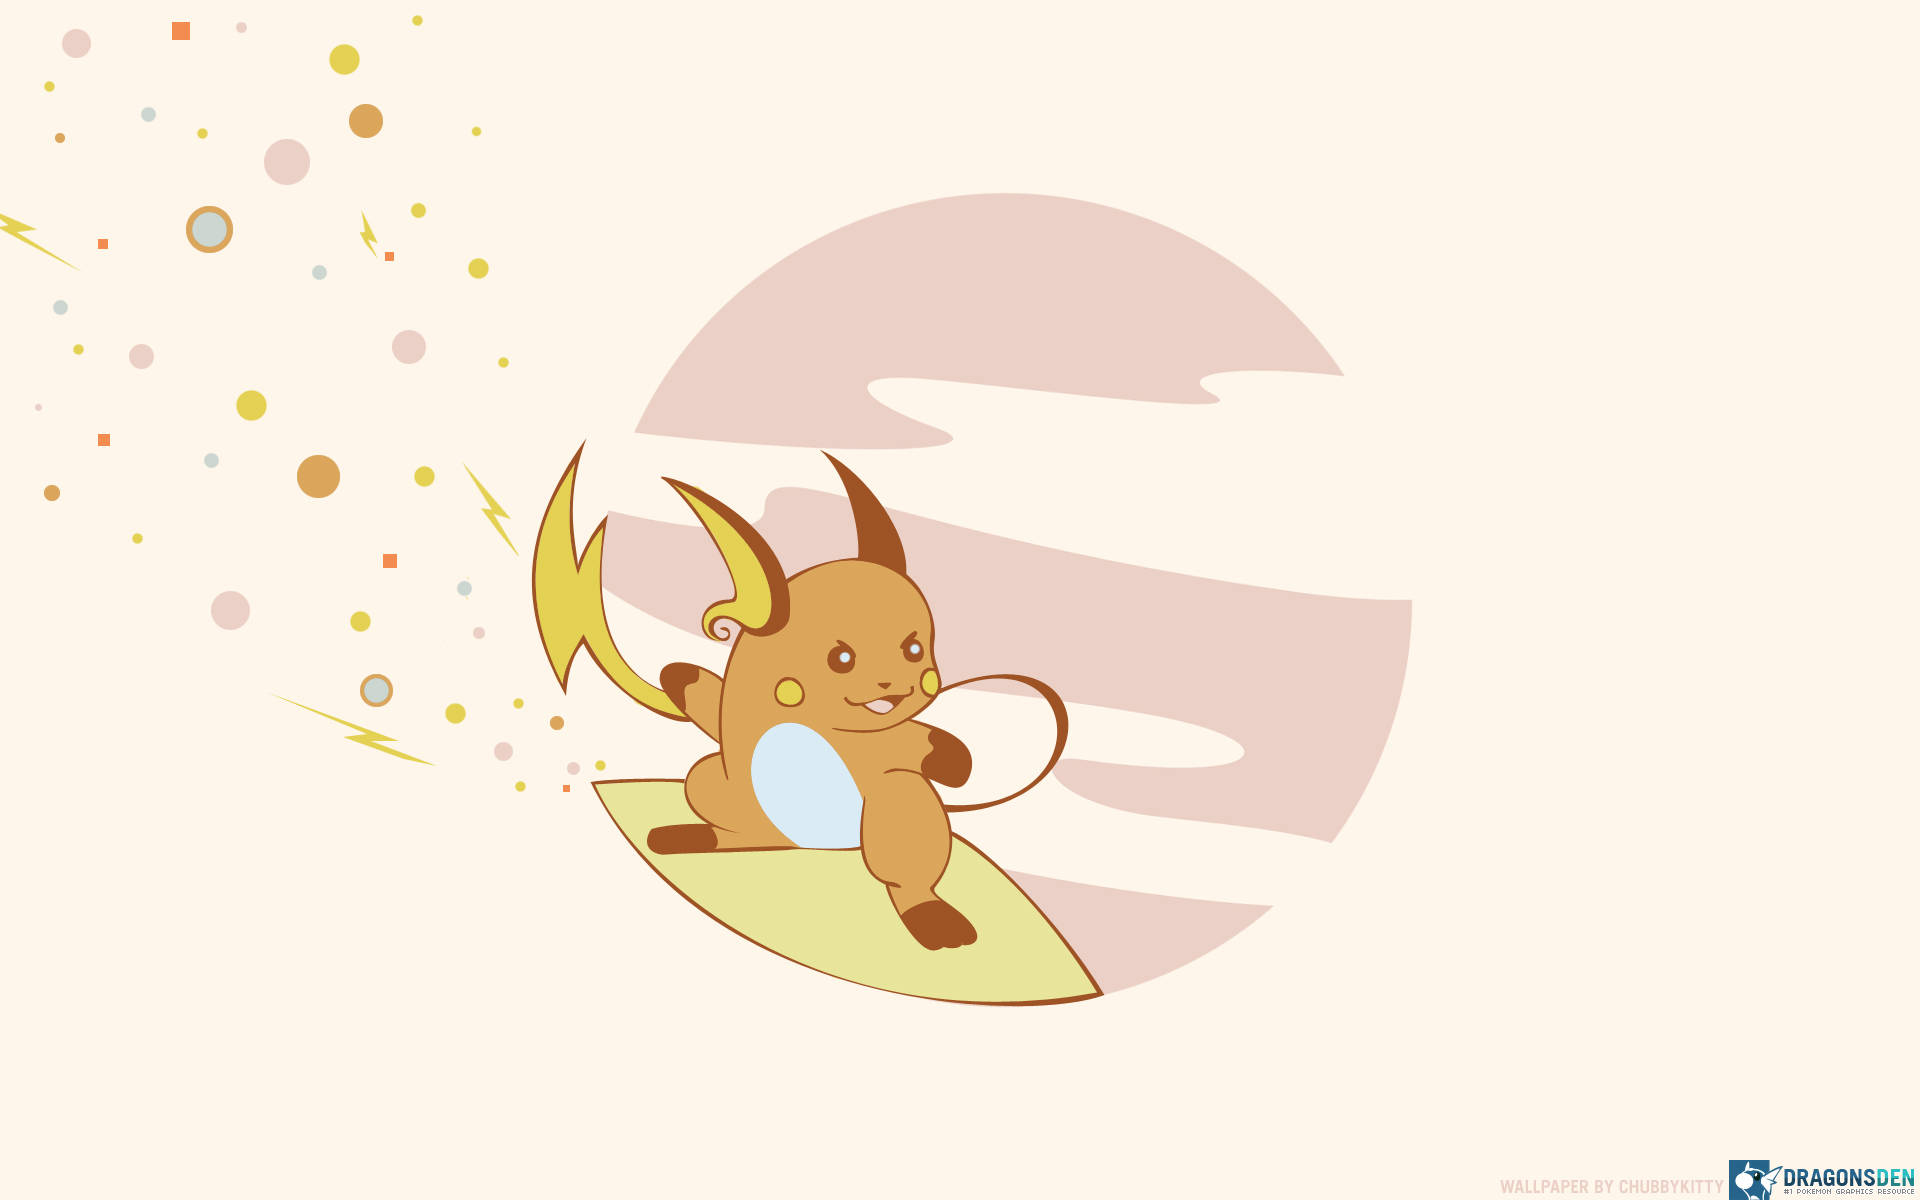 Ride The Surfing Wave With Raichu! Background